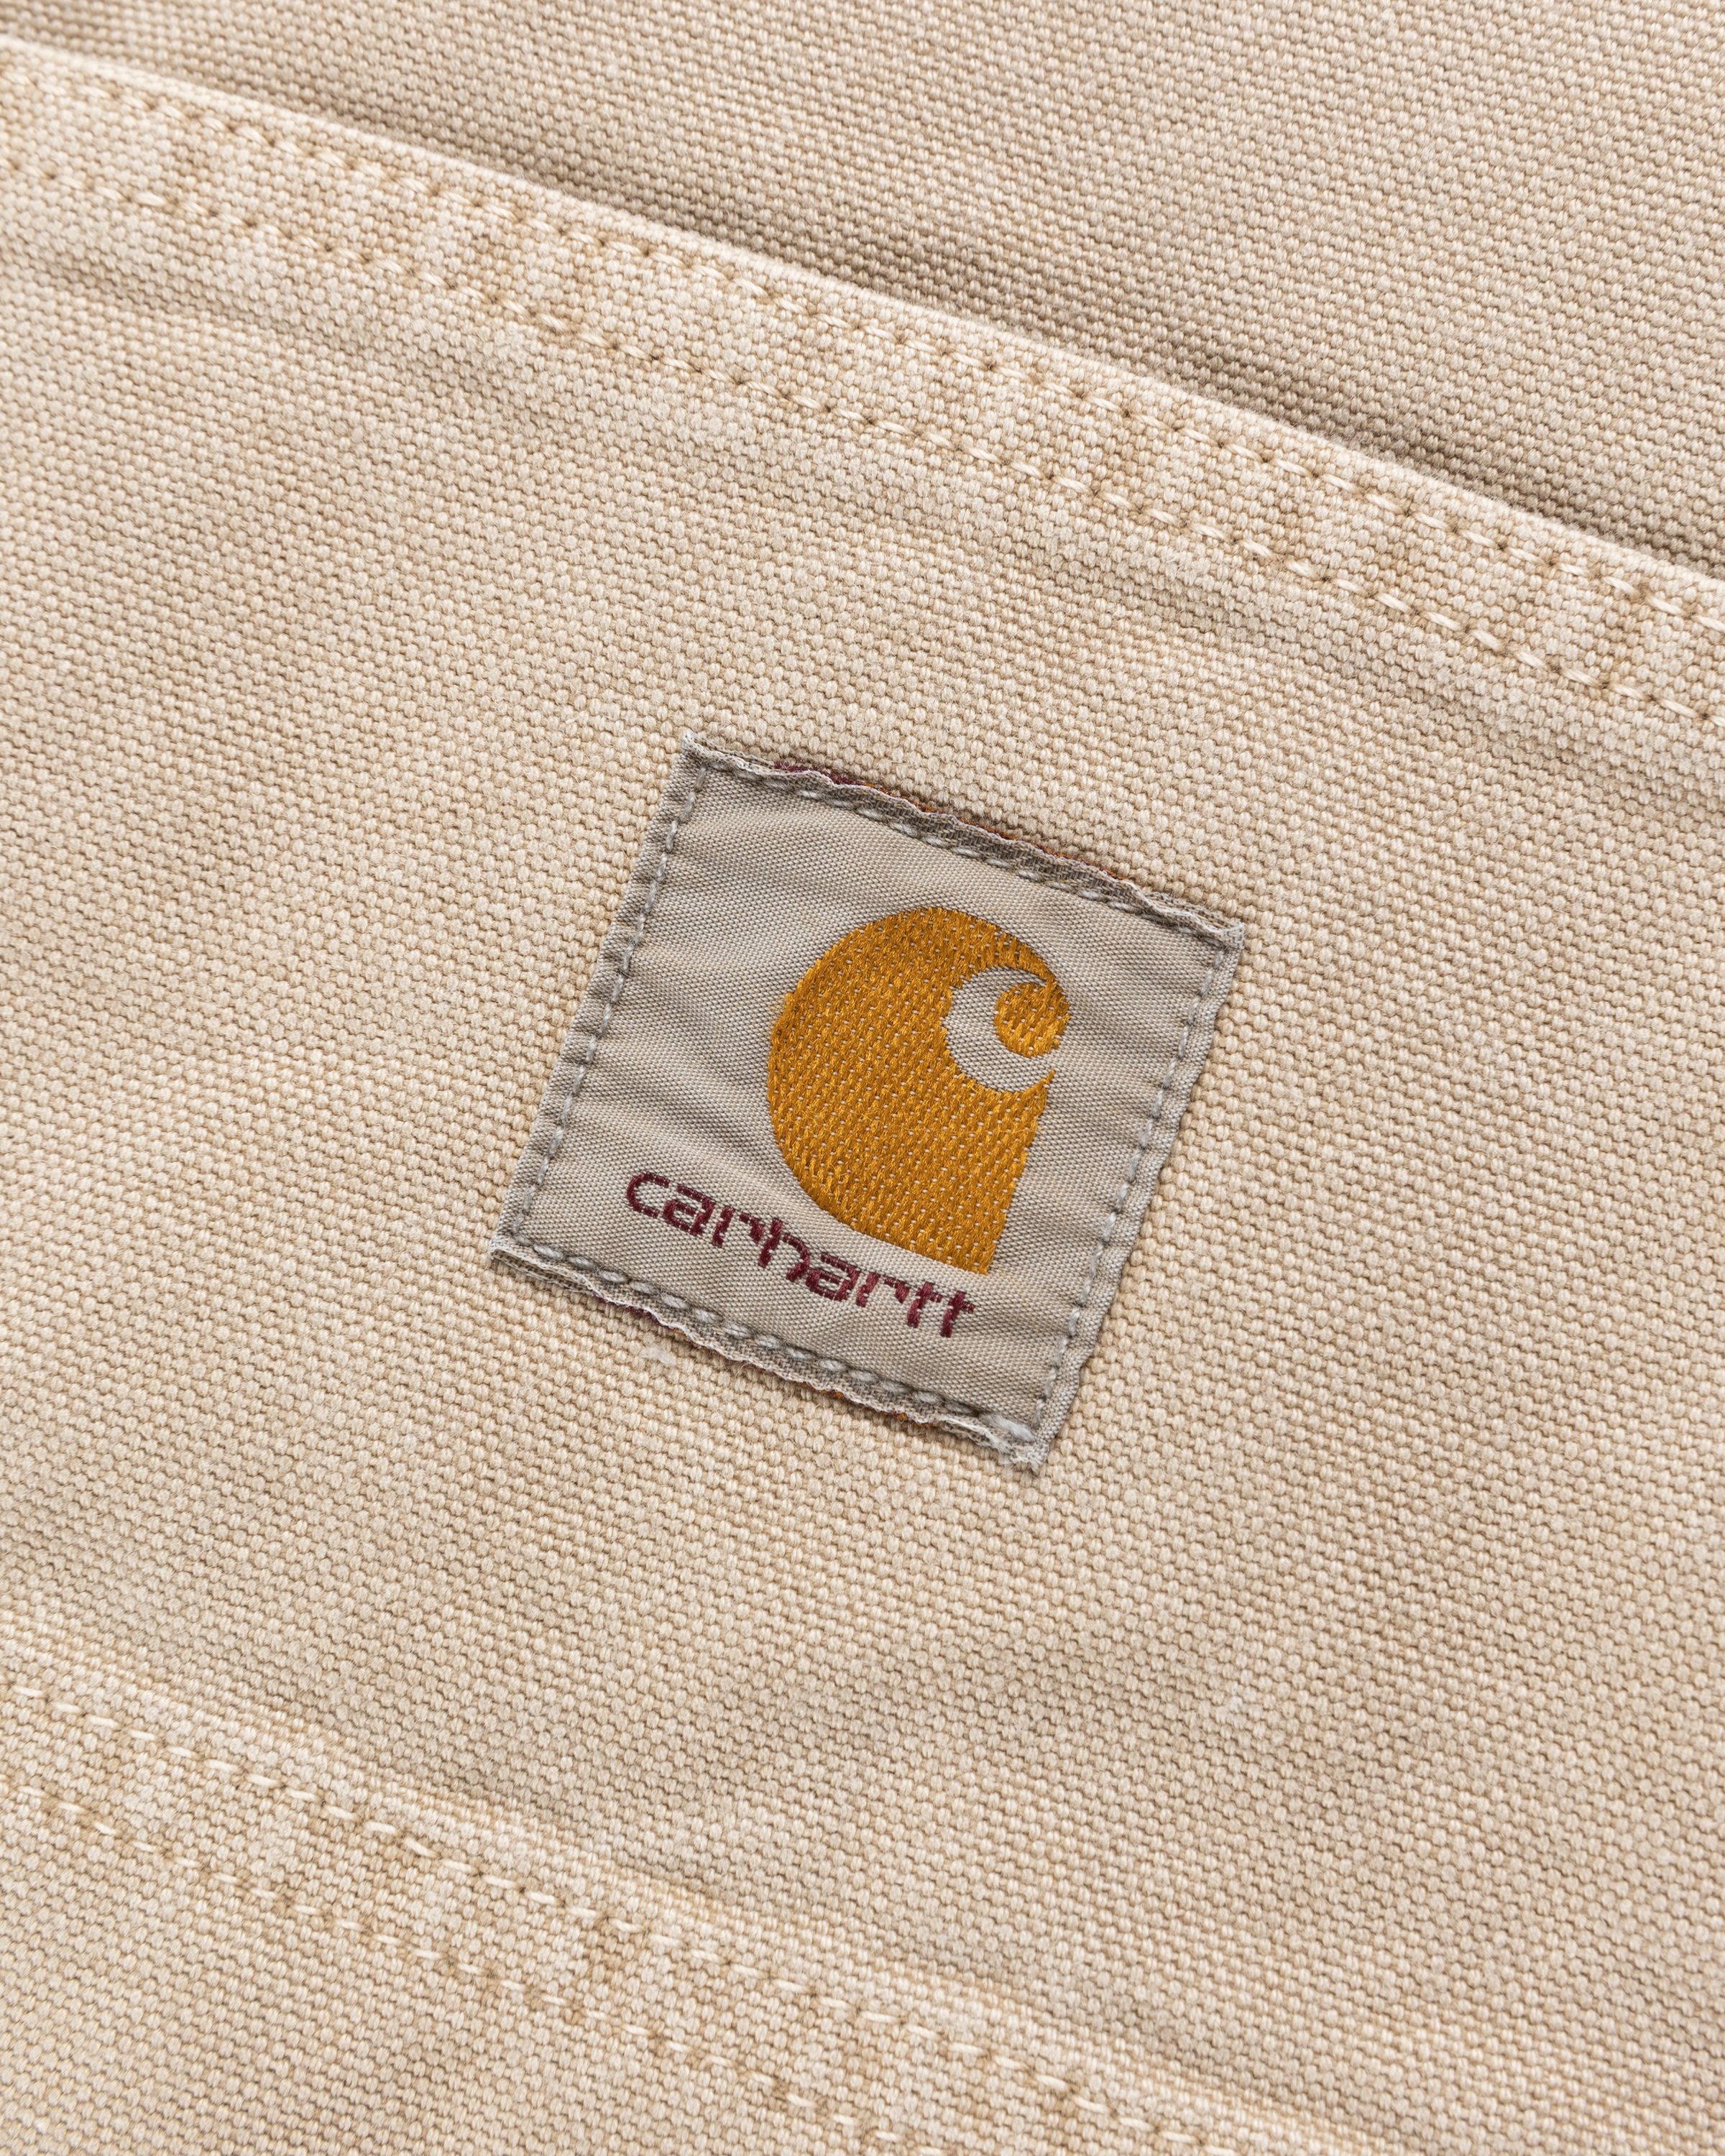 Carhartt WIP – Large Bayfield Tote Dusty Hamilton Brown Faded ...